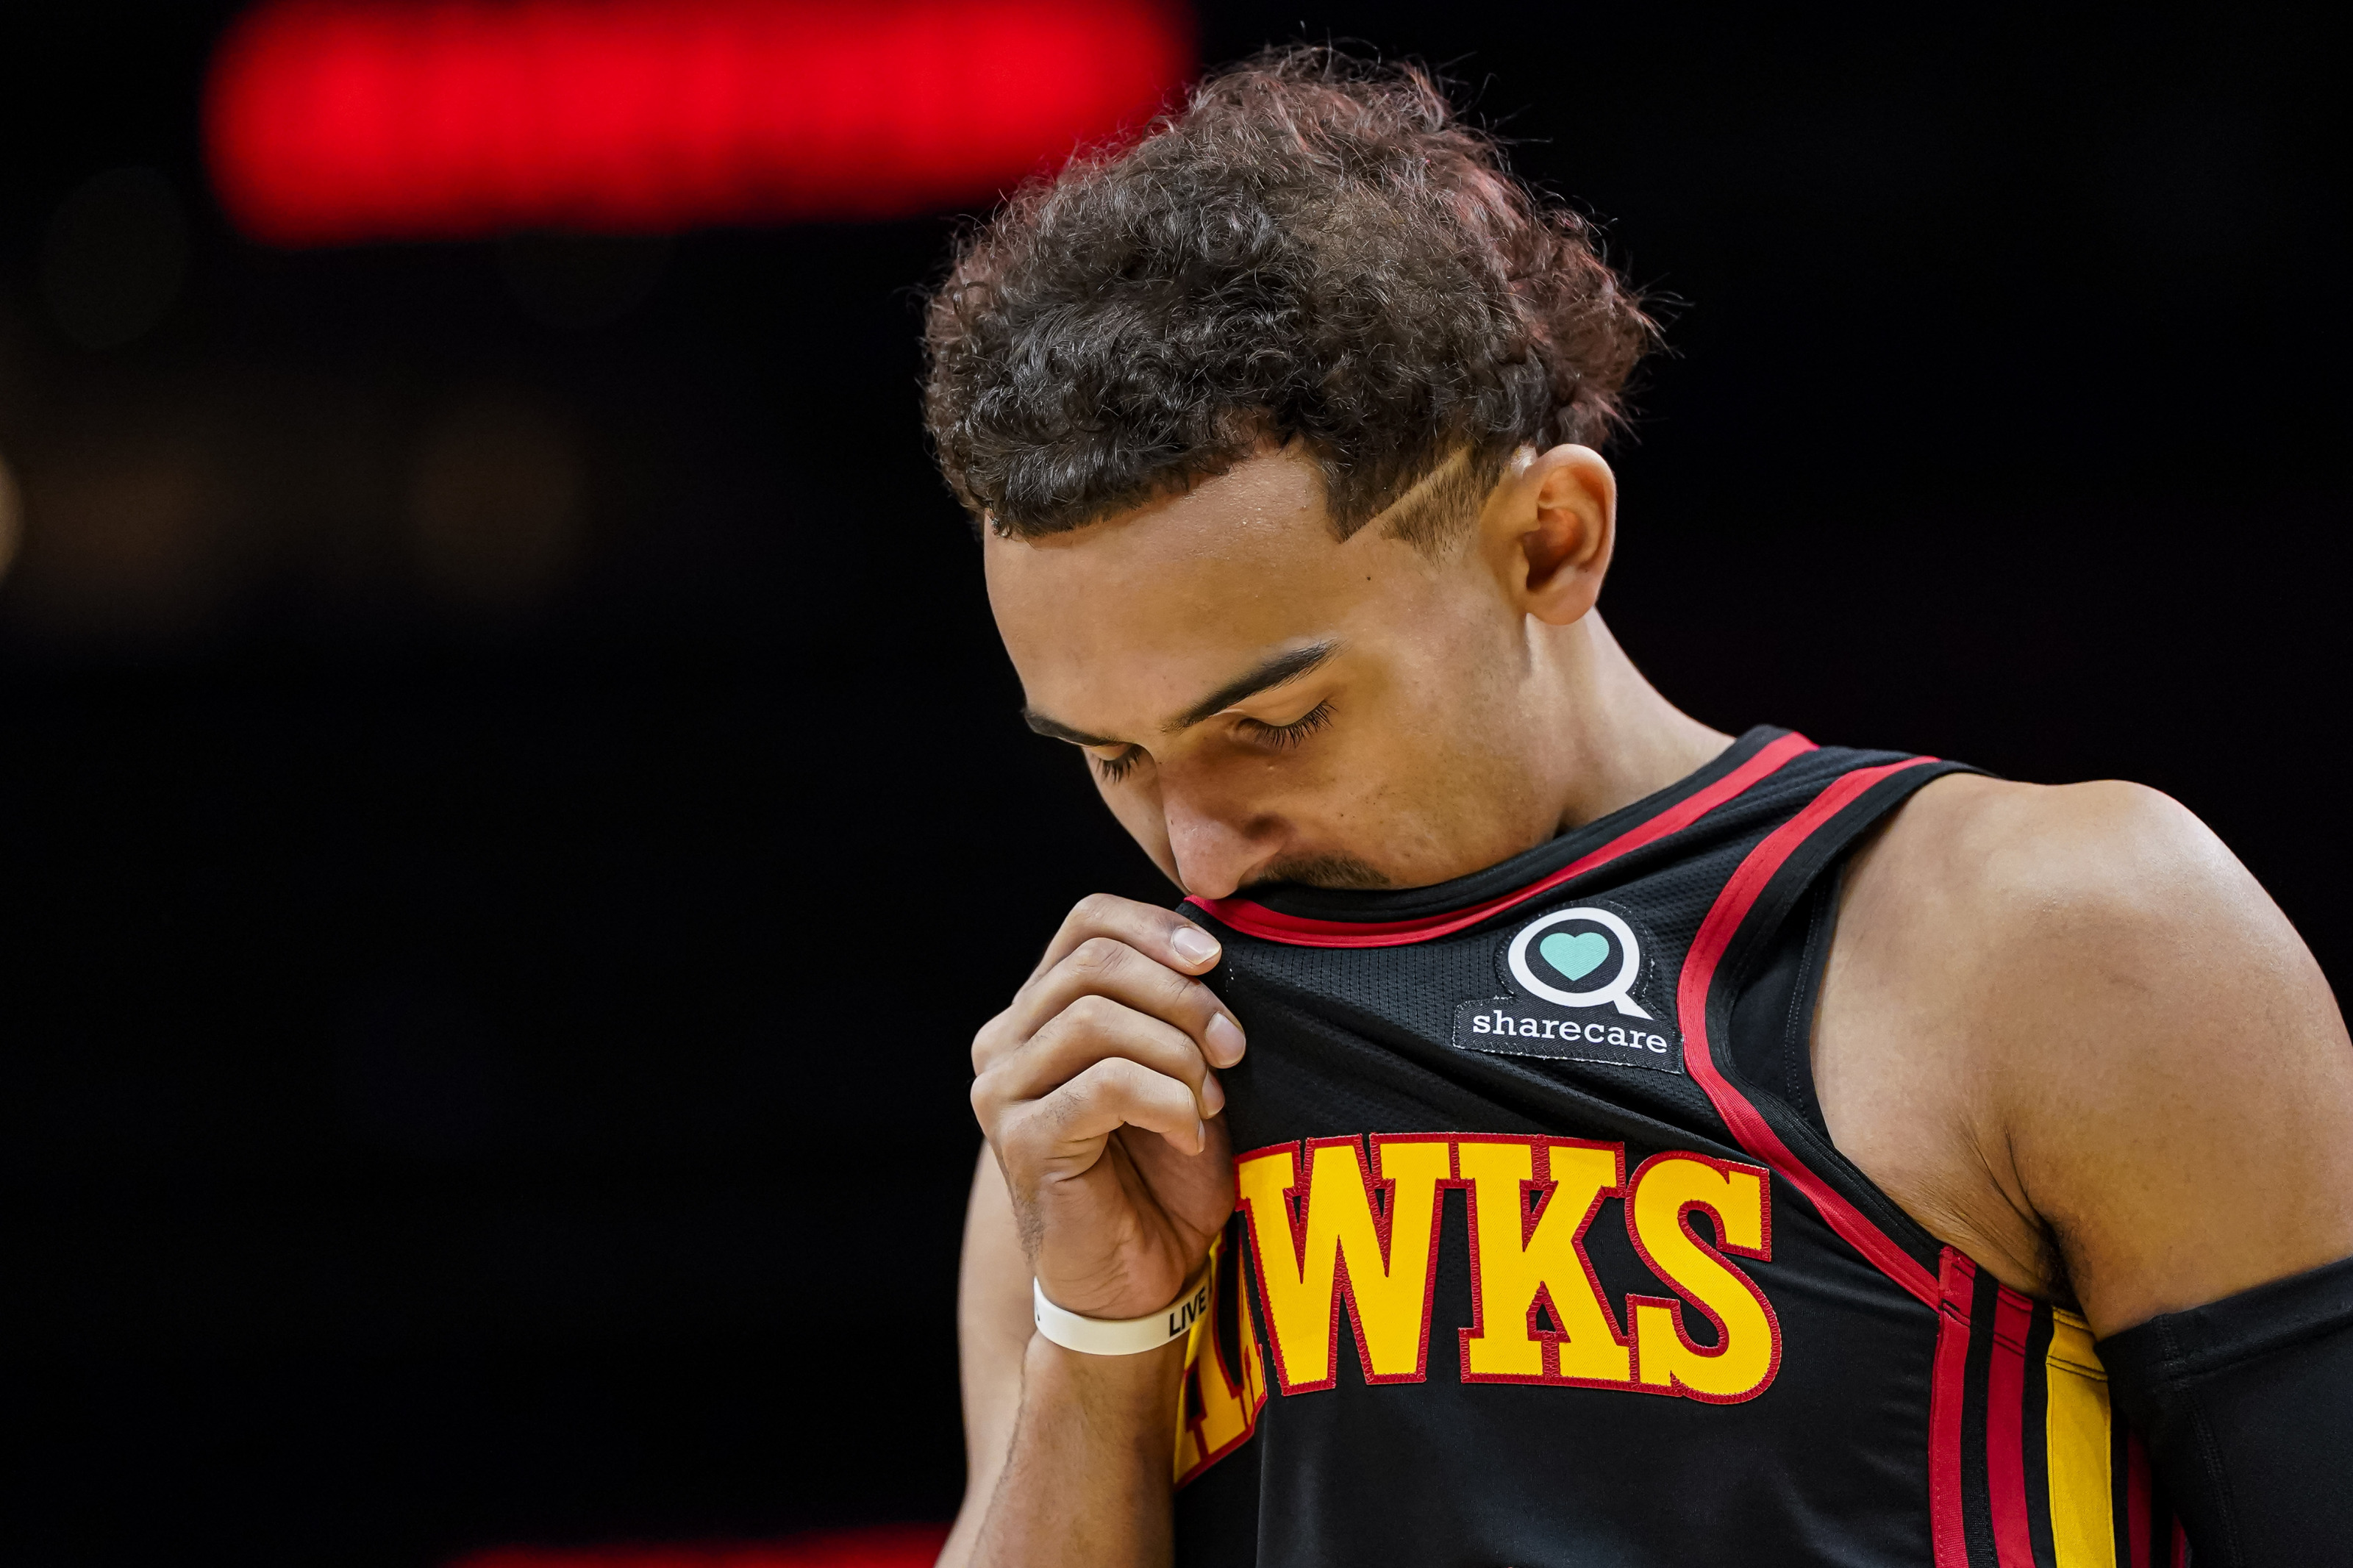 Atlanta Hawks: Young's jersey sales reach highest ranking of his career